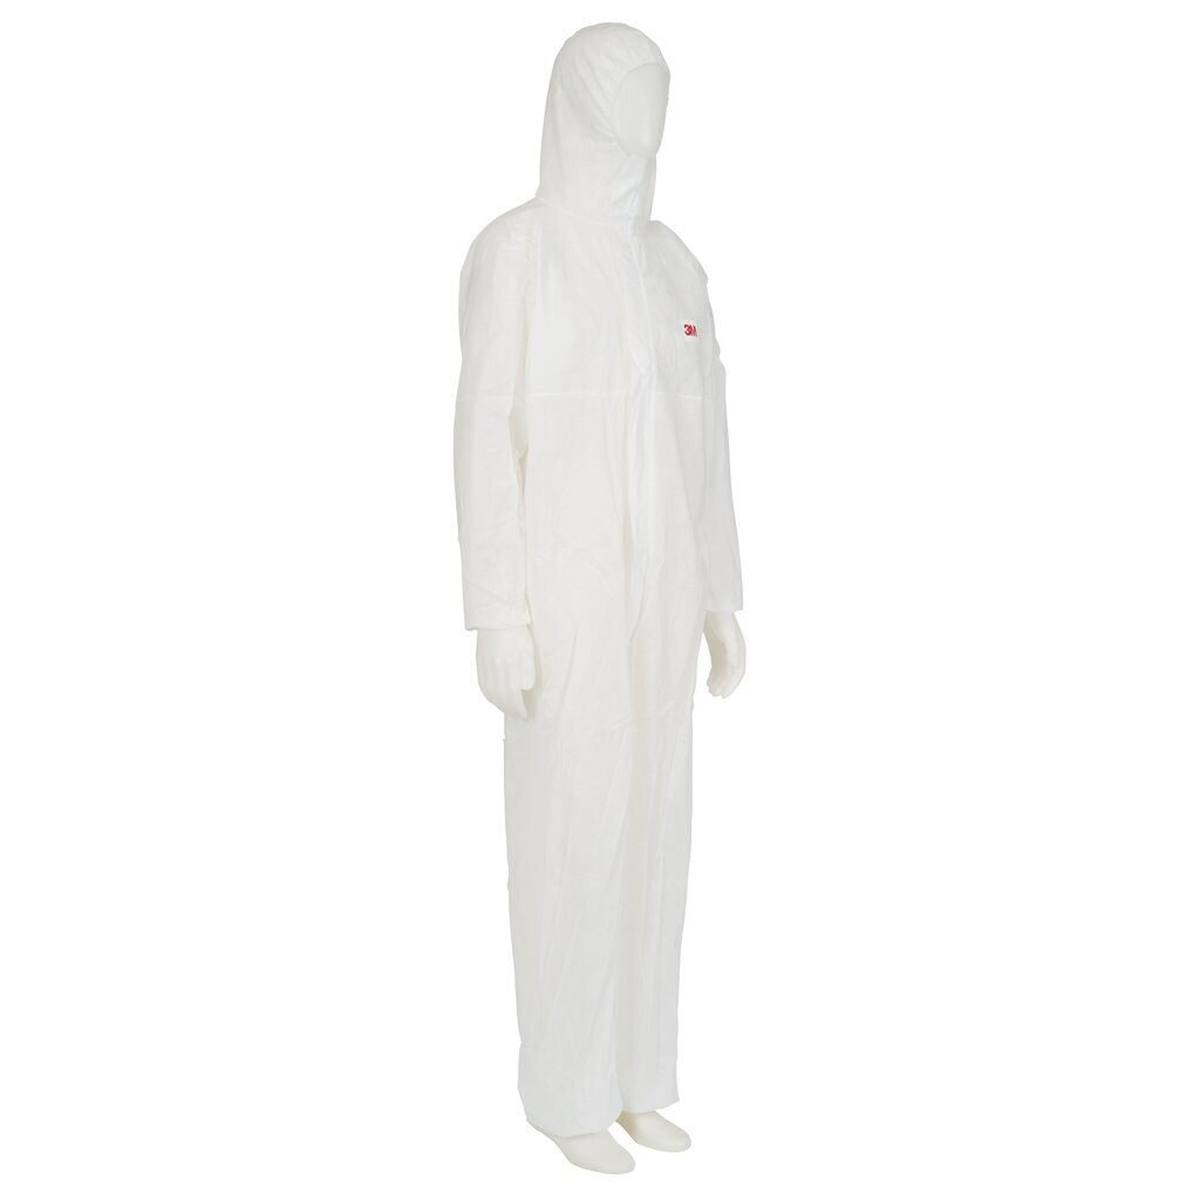 3M 4500 W coverall, white, CE, size XL, material polypropylene, elastic band finish